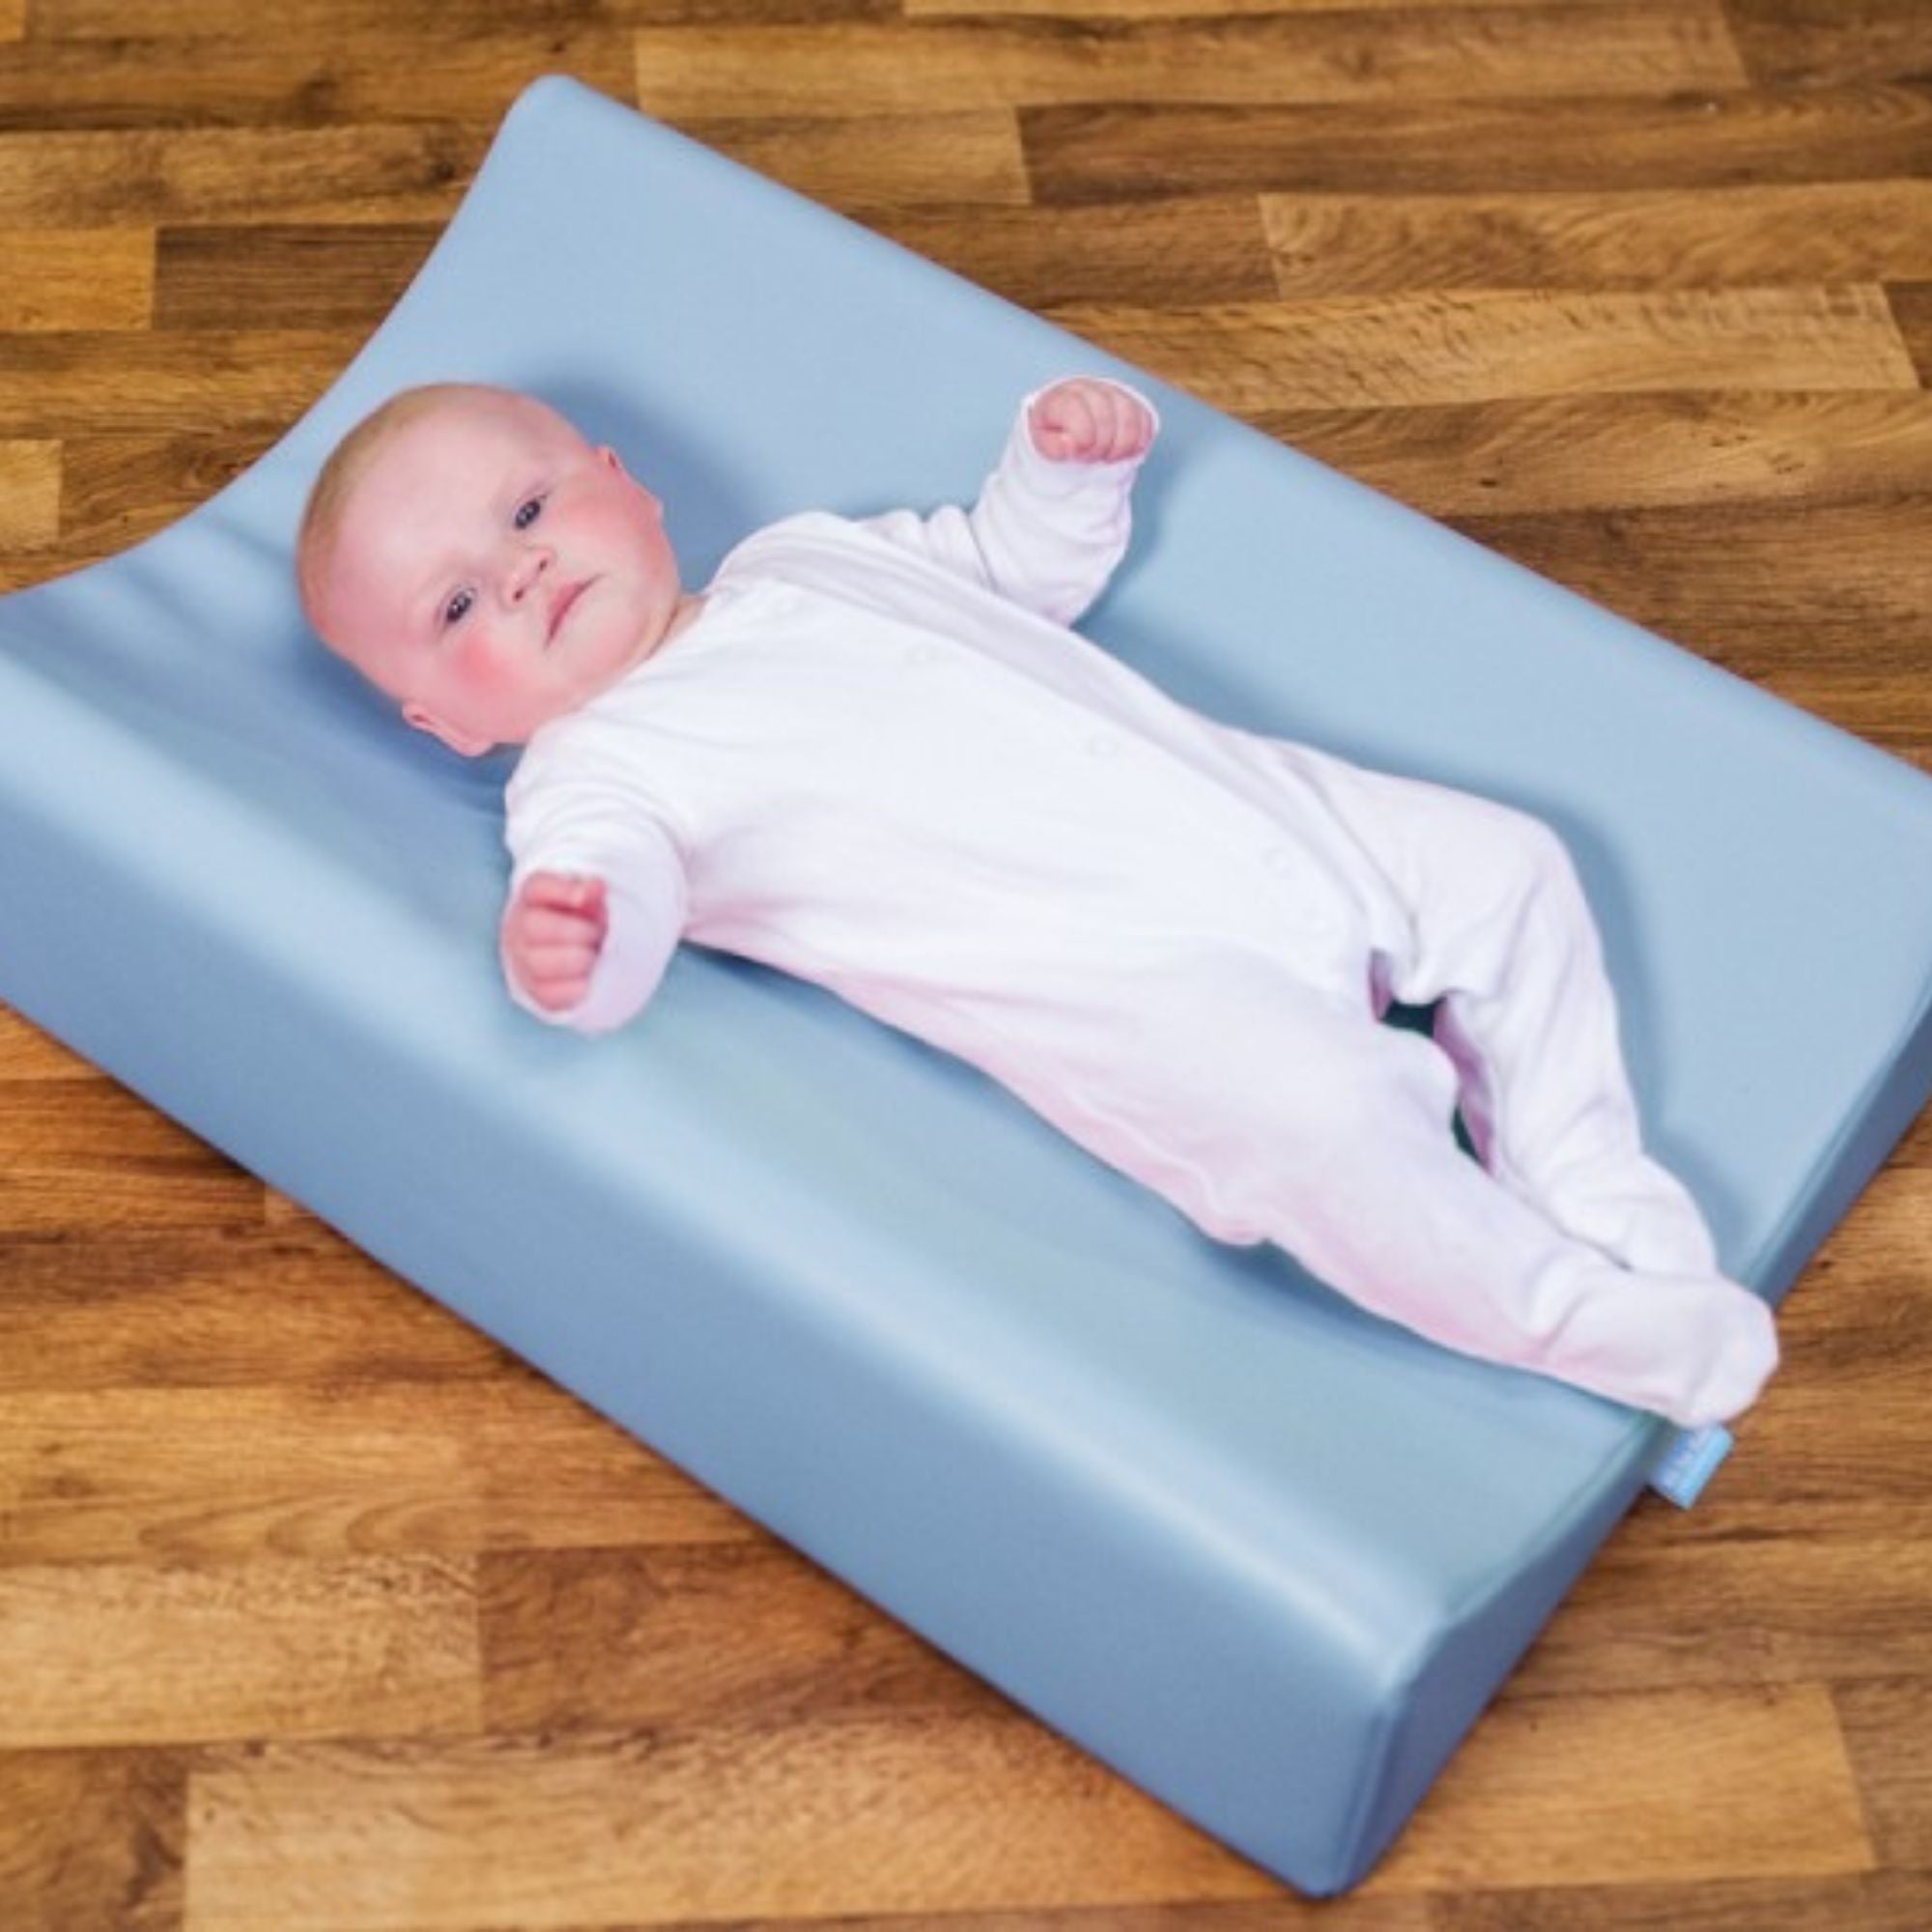 Snoozeland™ Changing Mat Light Blue Pack of 3, The Snoozeland™ Changing Mat Light Blue is our toughest professional changing mat for use on its own or on changing tables or units. The Snoozeland™ Changing Mat Light Blue has a deep profiled foam design forms a concave surface to gently hold active and larger babies without restricting access The Snoozeland™ Changing Mat has a Wipe-clean surface designed for constant cleaning The Snoozeland™ Changing Mat comes as a set of 3 changing mats. Our toughest profess